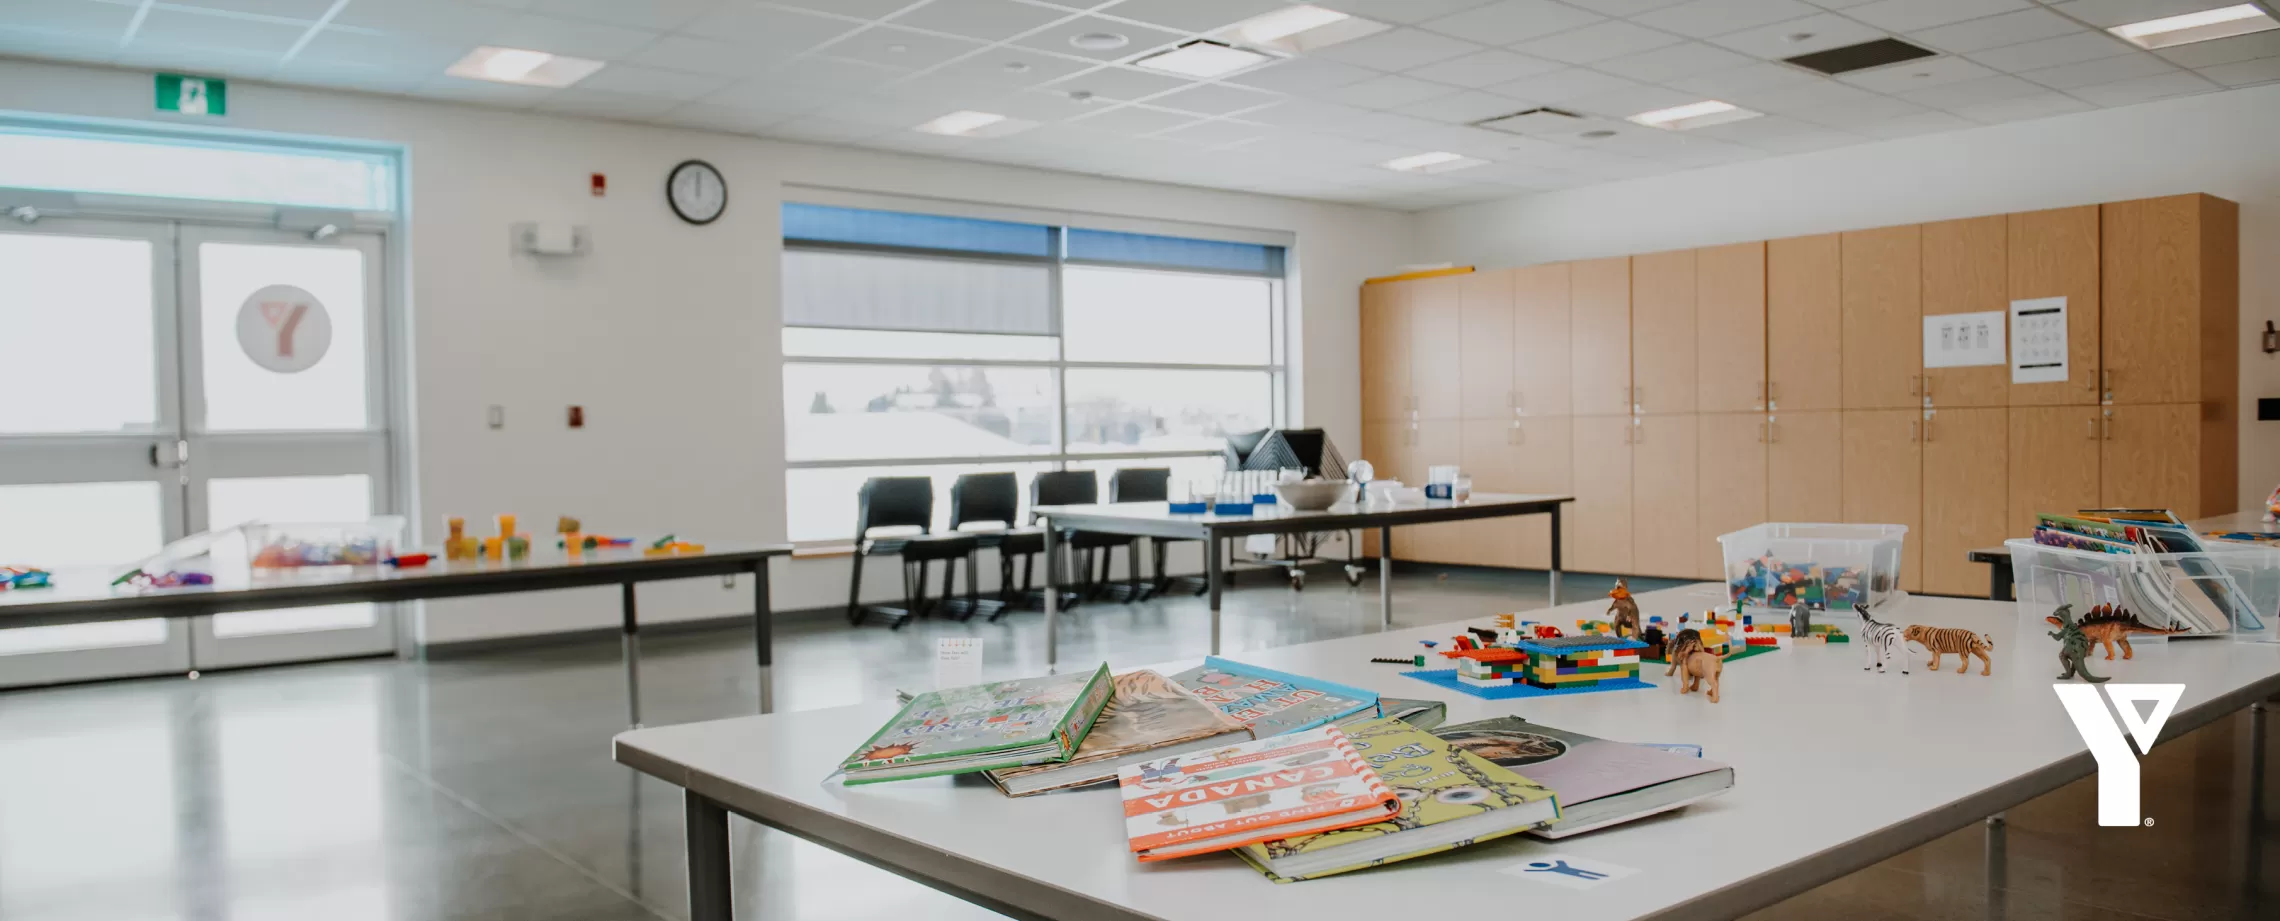 Tables in a sun-filled room are prepared with various children's activities, like books, blocks and science experiments,